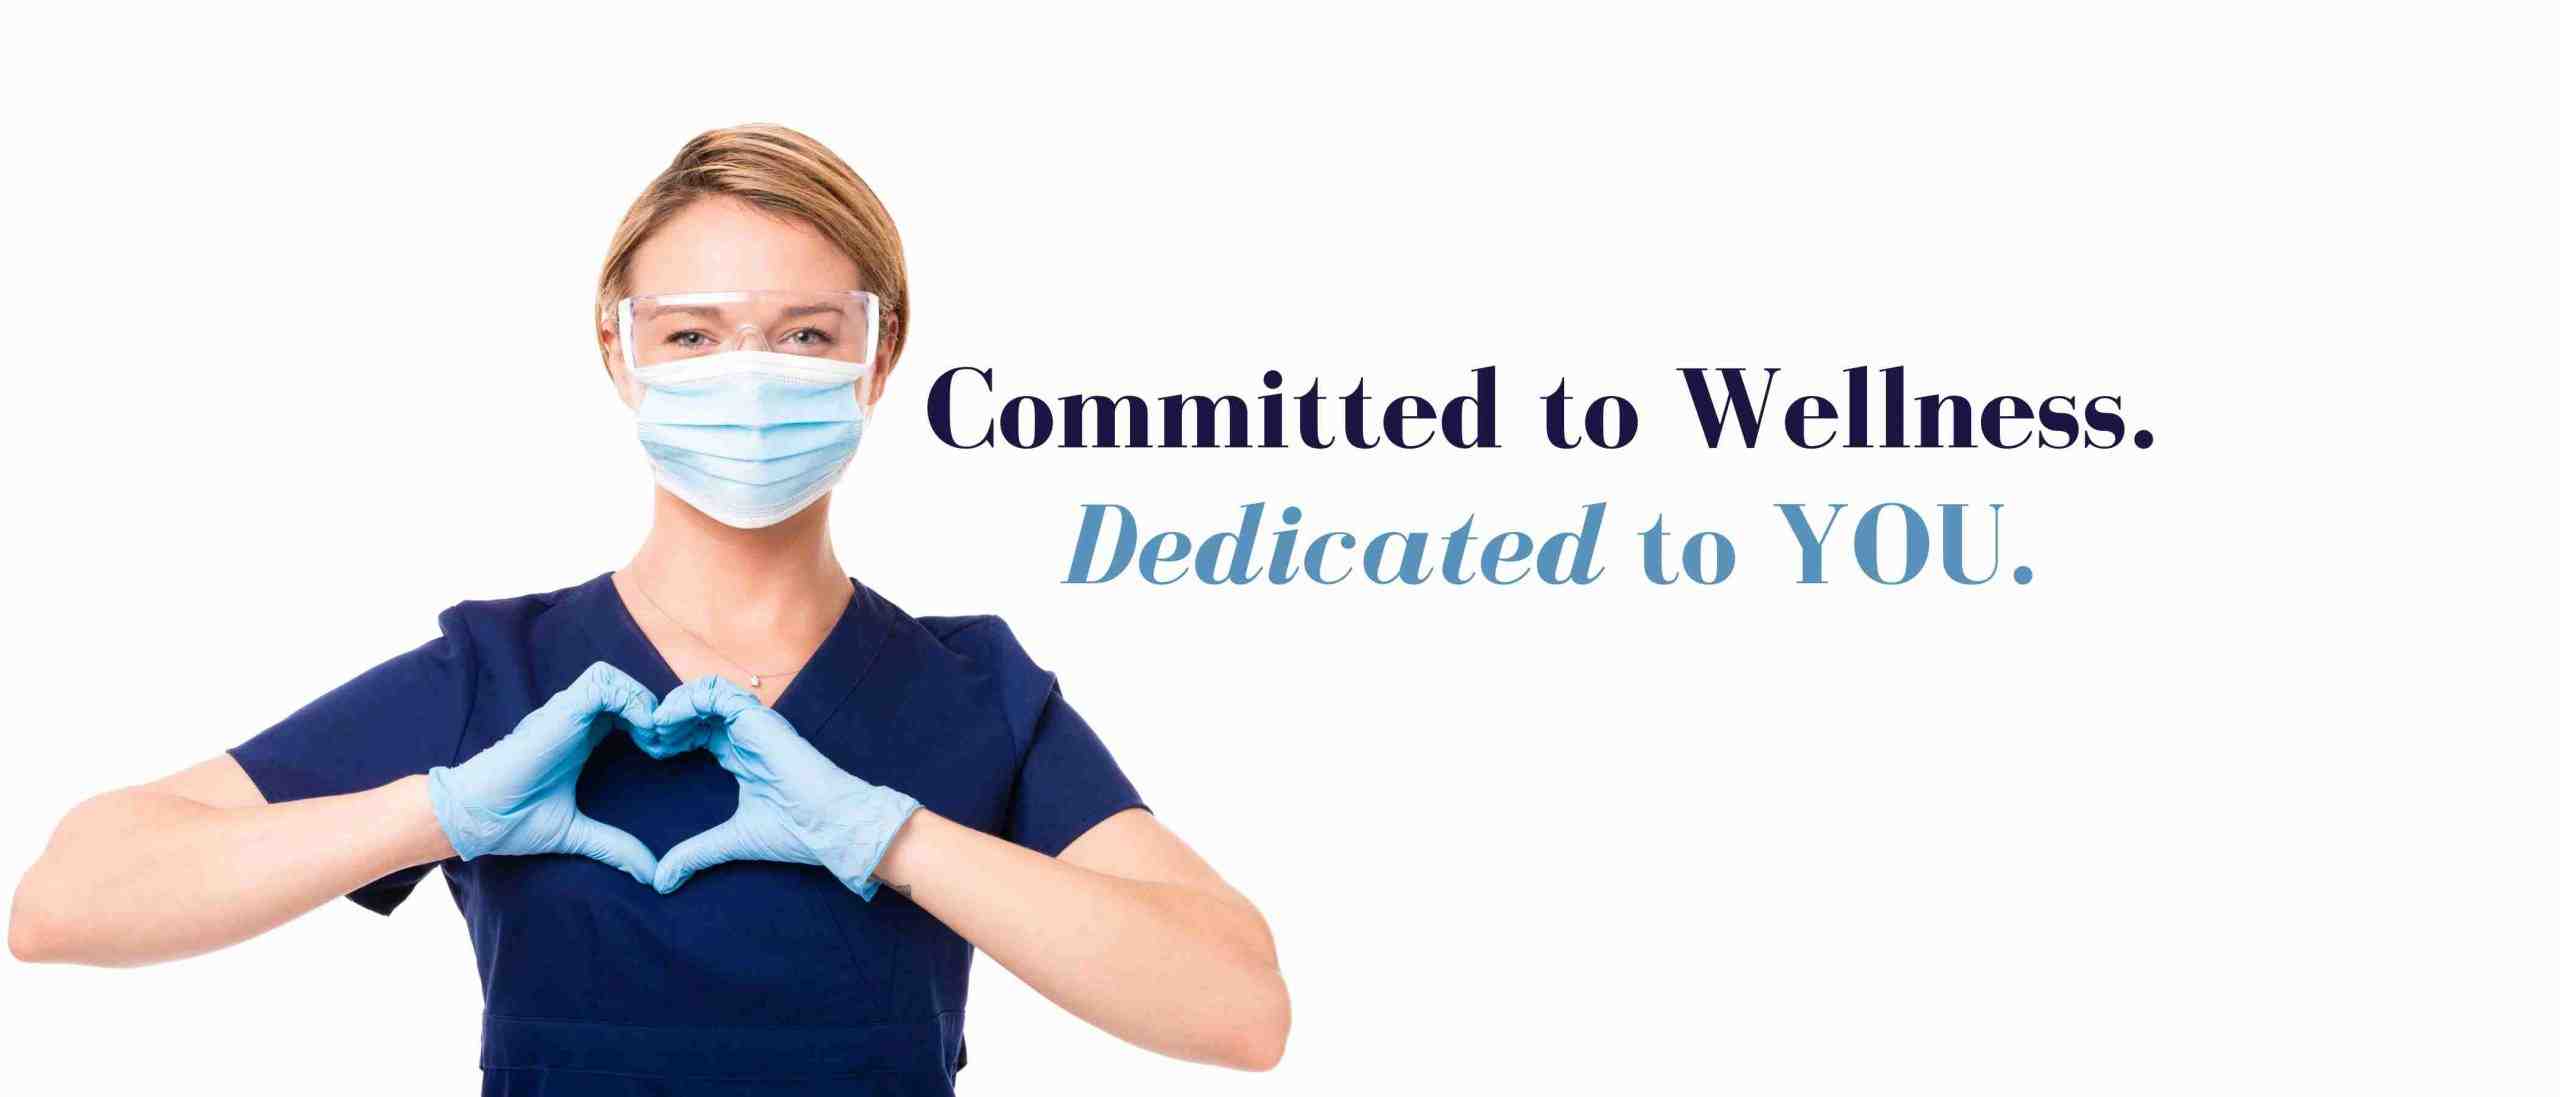 Committed to Wellness. Dedicated to YOU